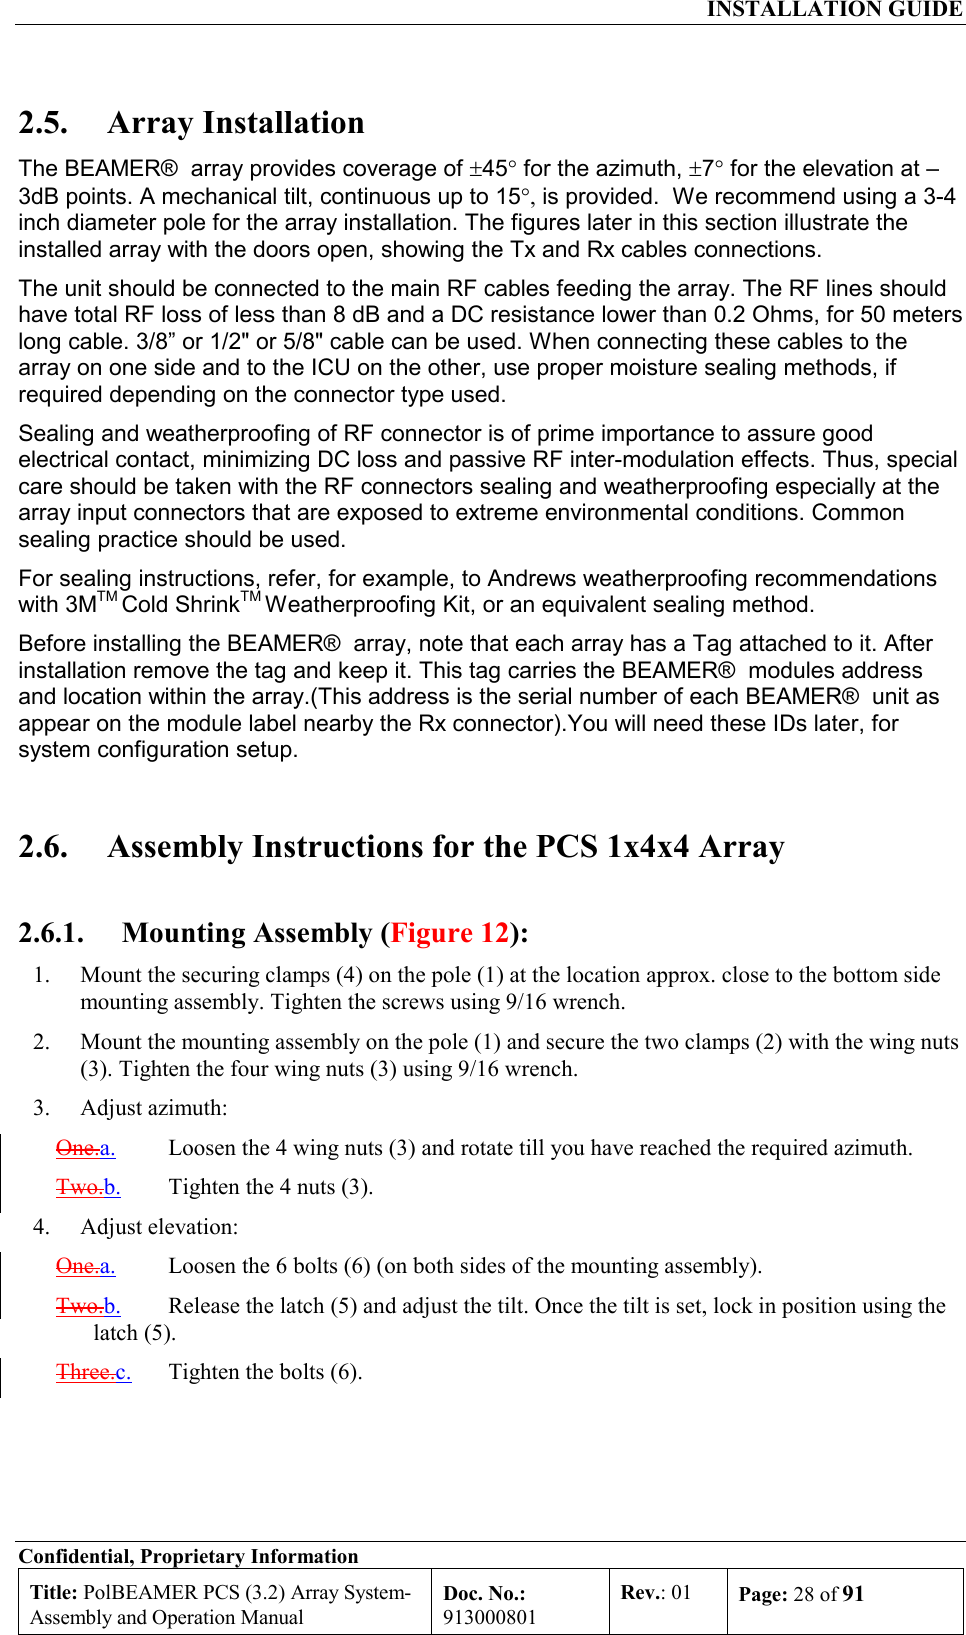  INSTALLATION GUIDE Confidential, Proprietary Information Title: PolBEAMER PCS (3.2) Array System- Assembly and Operation Manual Doc. No.: 913000801 Rev.: 01  Page: 28 of 91  2.5. Array Installation The BEAMER®  array provides coverage of ±45° for the azimuth, ±7° for the elevation at –3dB points. A mechanical tilt, continuous up to 15°, is provided.  We recommend using a 3-4 inch diameter pole for the array installation. The figures later in this section illustrate the installed array with the doors open, showing the Tx and Rx cables connections.  The unit should be connected to the main RF cables feeding the array. The RF lines should have total RF loss of less than 8 dB and a DC resistance lower than 0.2 Ohms, for 50 meters long cable. 3/8” or 1/2&quot; or 5/8&quot; cable can be used. When connecting these cables to the array on one side and to the ICU on the other, use proper moisture sealing methods, if required depending on the connector type used.  Sealing and weatherproofing of RF connector is of prime importance to assure good electrical contact, minimizing DC loss and passive RF inter-modulation effects. Thus, special care should be taken with the RF connectors sealing and weatherproofing especially at the array input connectors that are exposed to extreme environmental conditions. Common sealing practice should be used. For sealing instructions, refer, for example, to Andrews weatherproofing recommendations with 3MTM Cold ShrinkTM Weatherproofing Kit, or an equivalent sealing method.  Before installing the BEAMER®  array, note that each array has a Tag attached to it. After installation remove the tag and keep it. This tag carries the BEAMER®  modules address and location within the array.(This address is the serial number of each BEAMER®  unit as appear on the module label nearby the Rx connector).You will need these IDs later, for system configuration setup. 2.6.  Assembly Instructions for the PCS 1x4x4 Array 2.6.1.  Mounting Assembly (Figure 12): 1.  Mount the securing clamps (4) on the pole (1) at the location approx. close to the bottom side mounting assembly. Tighten the screws using 9/16 wrench. 2.  Mount the mounting assembly on the pole (1) and secure the two clamps (2) with the wing nuts (3). Tighten the four wing nuts (3) using 9/16 wrench. 3. Adjust azimuth: One.a. Loosen the 4 wing nuts (3) and rotate till you have reached the required azimuth. Two.b.  Tighten the 4 nuts (3). 4. Adjust elevation: One.a. Loosen the 6 bolts (6) (on both sides of the mounting assembly). Two.b.  Release the latch (5) and adjust the tilt. Once the tilt is set, lock in position using the latch (5). Three.c. Tighten the bolts (6). 